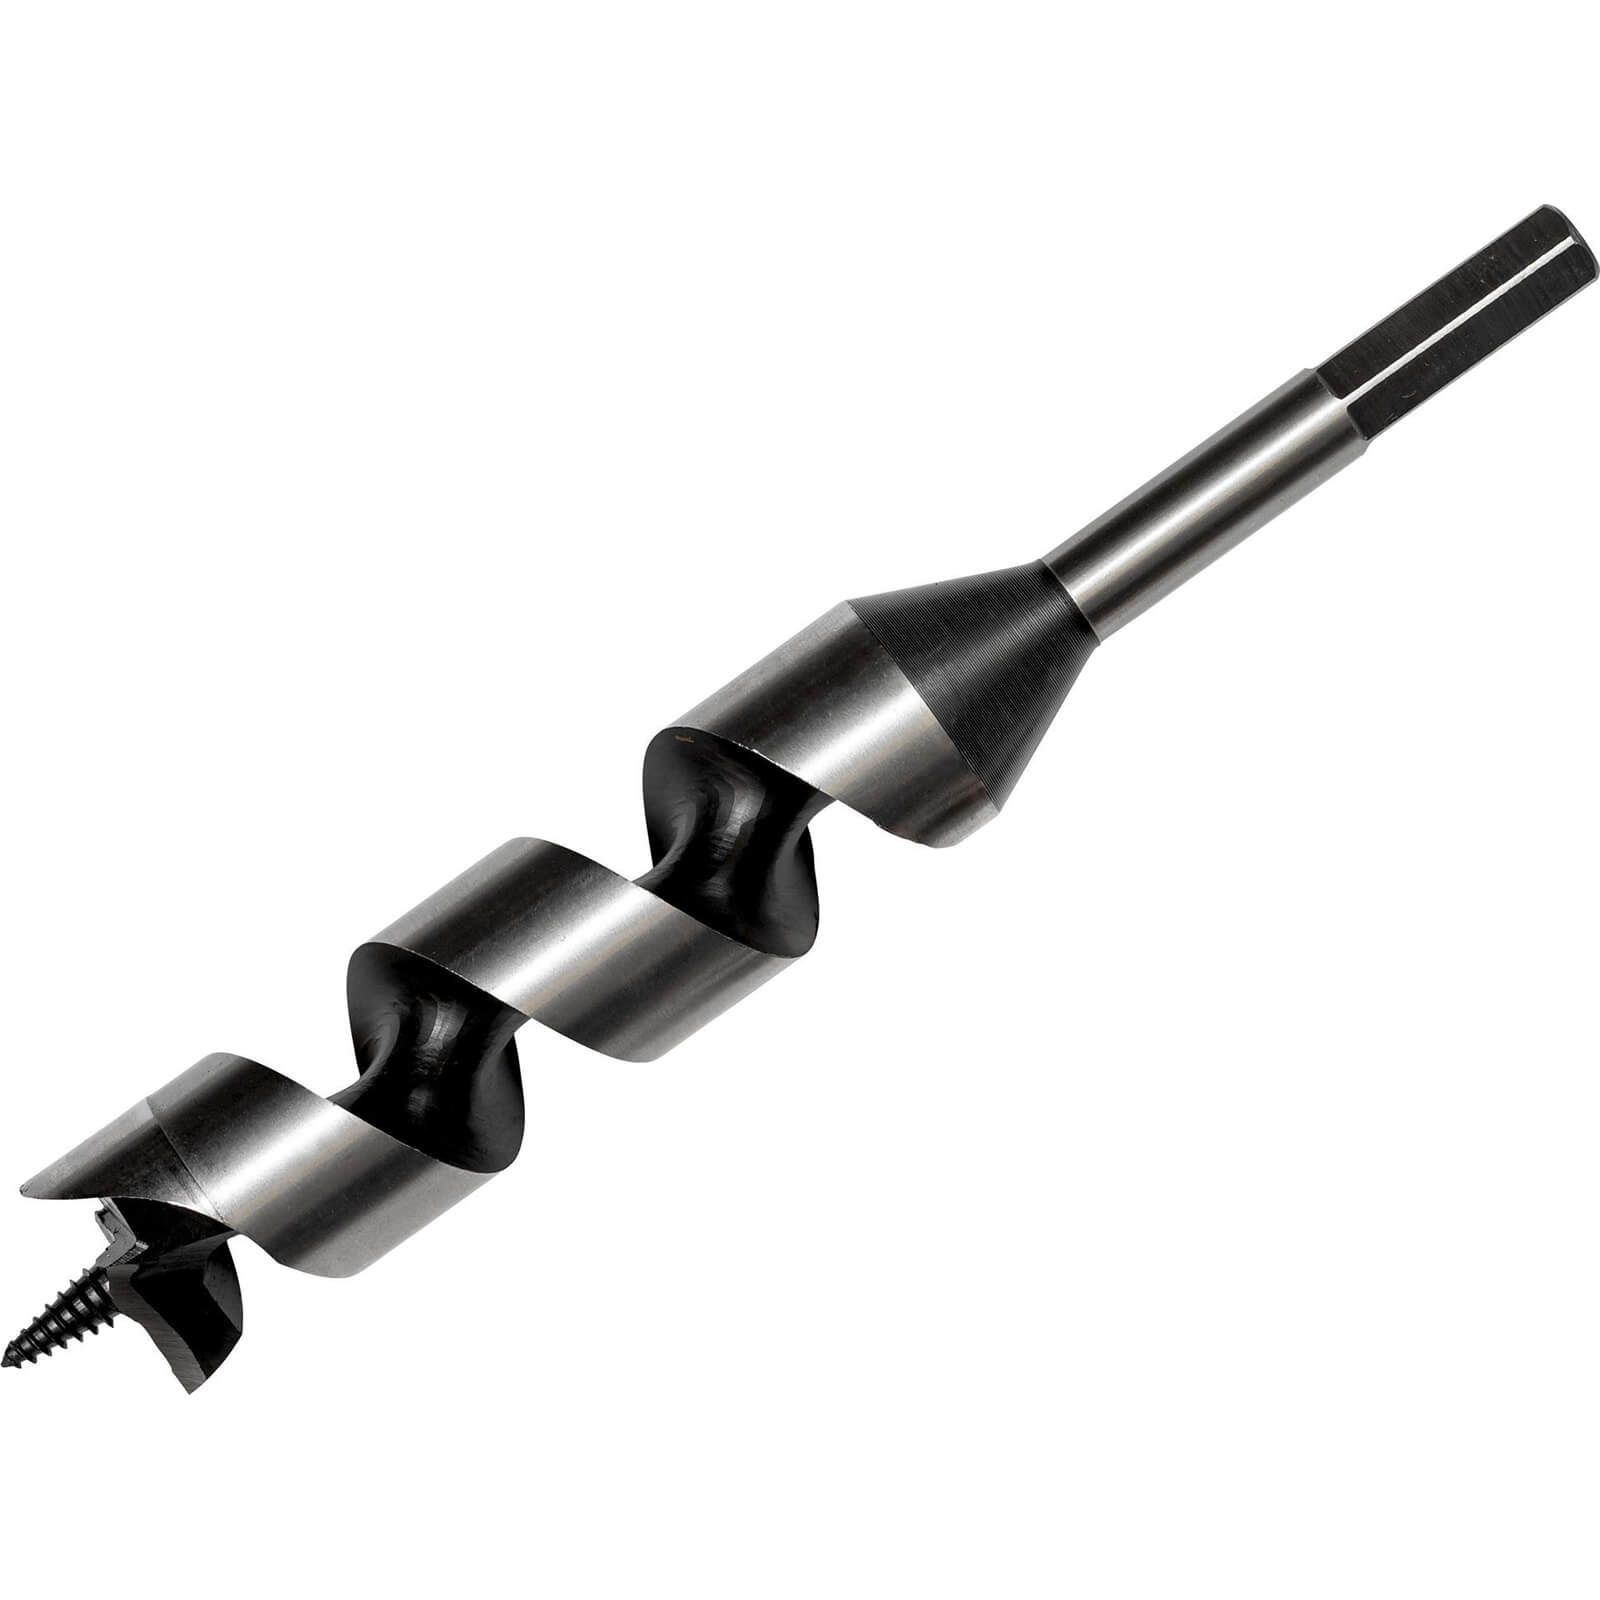 Photo of Bahco 9626 Series Combination Auger Drill Bit 13mm 230mm